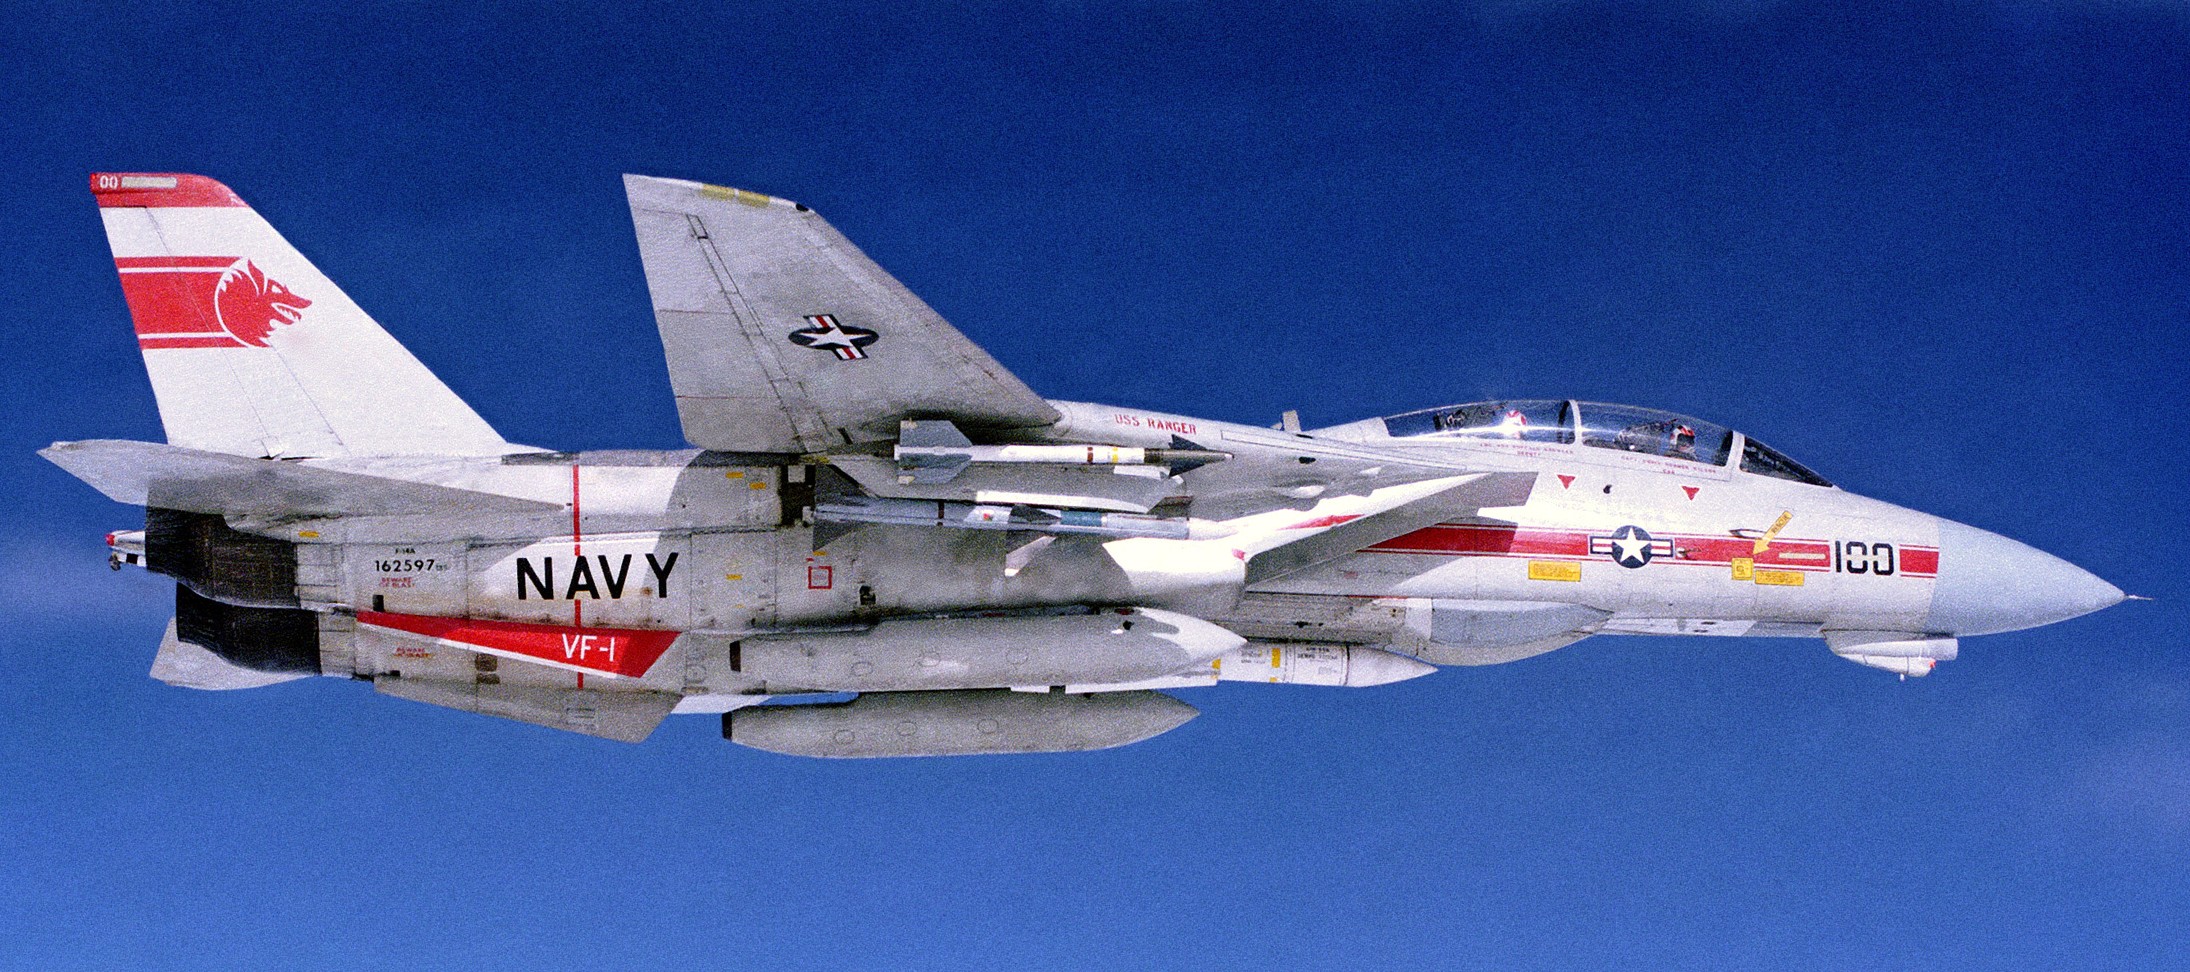 vf-1 wolfpack fighter squadron f-14a tomcat carrier air wing cvw-2 uss ranger cv-61 25 aim-7 sparrow aim-9 sidewinder missile